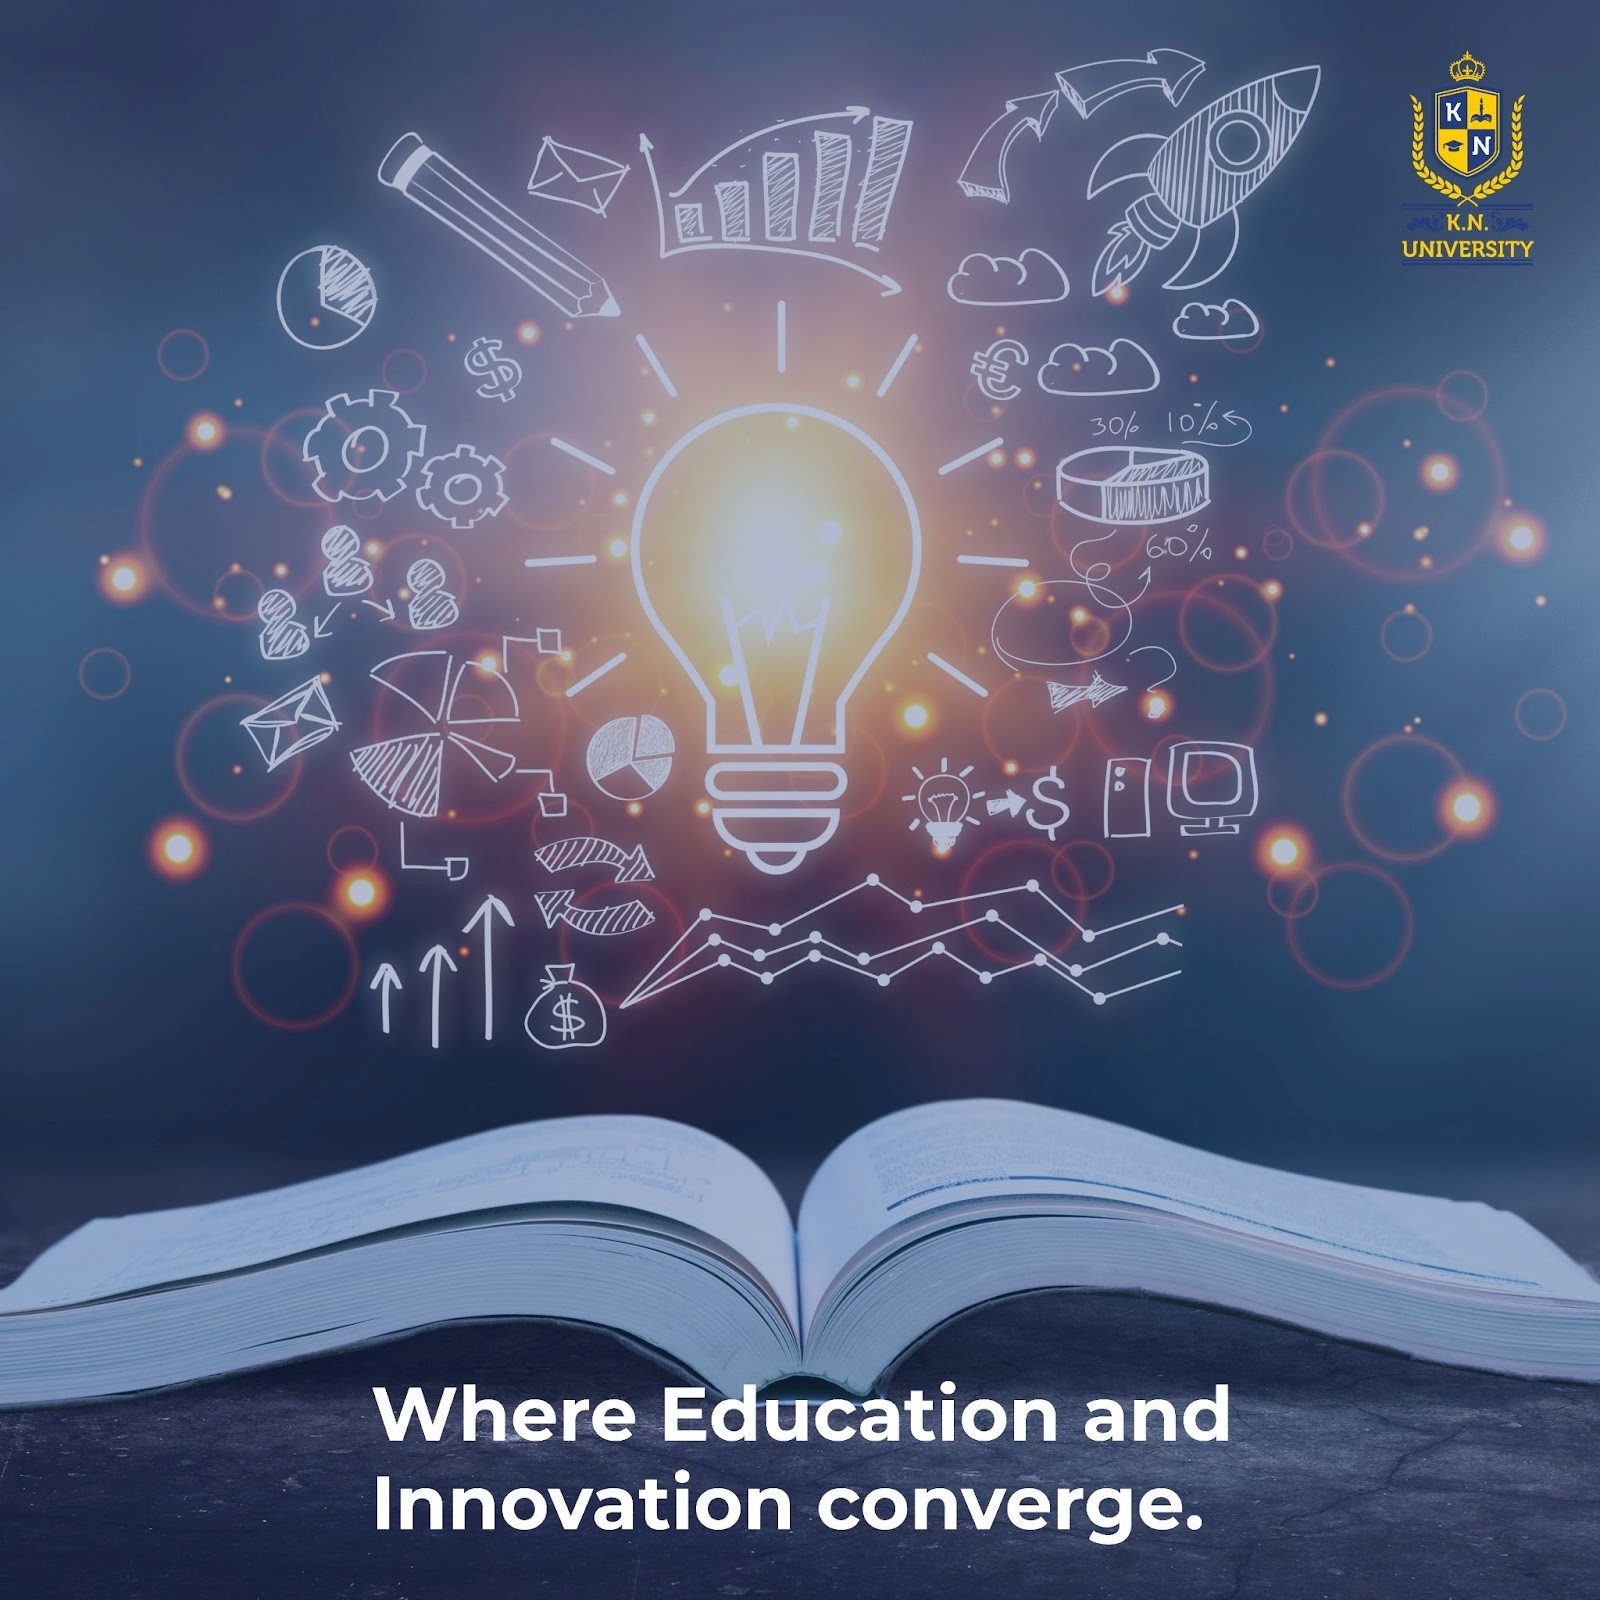 Discover Your Potential at K N University: Where Education and Innovation converge.